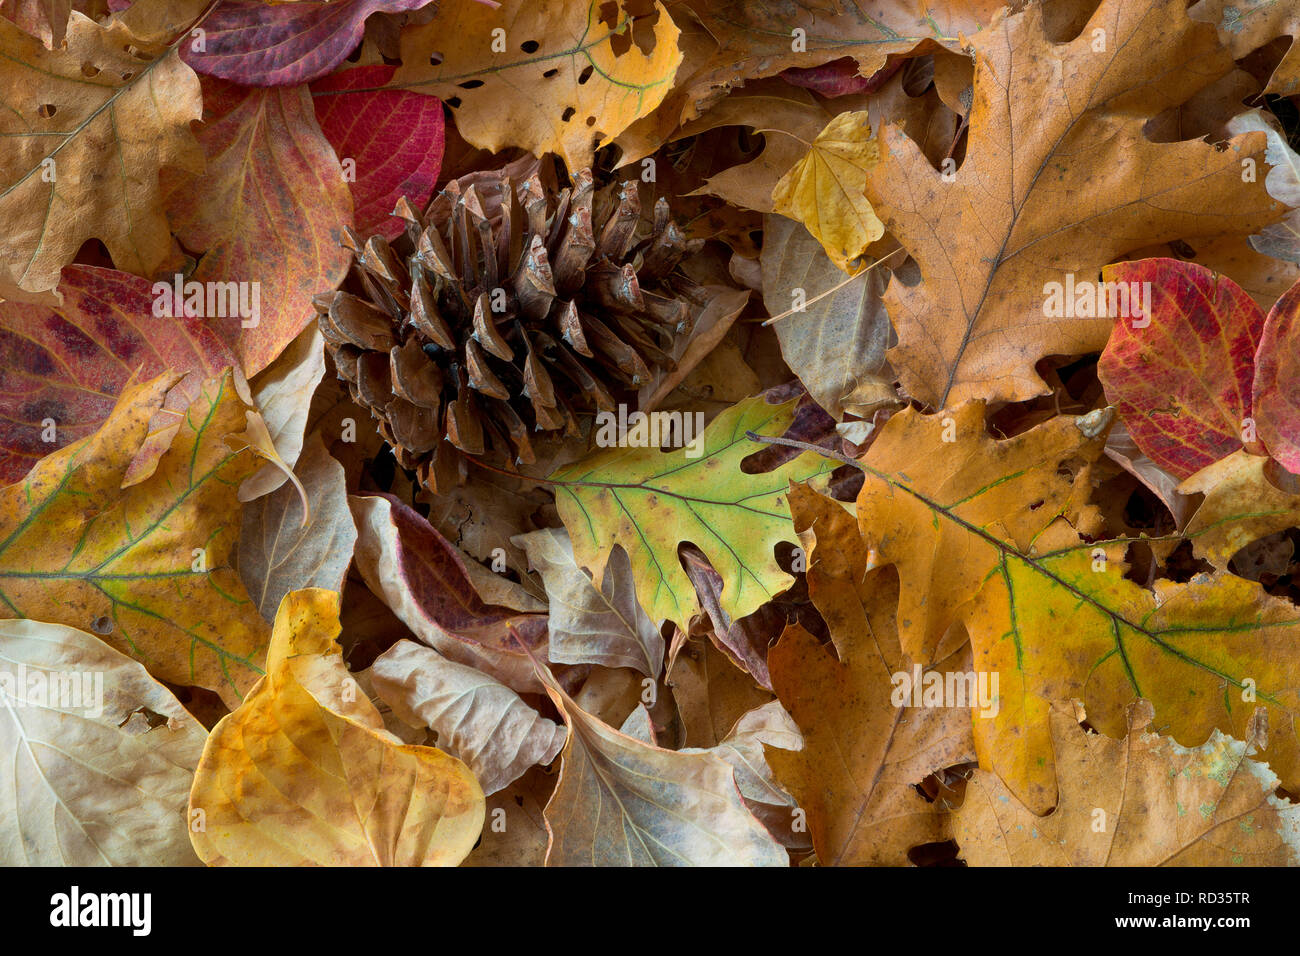 A ponderosa pine cone rests amongst fallen fall leaves in Yosemite National Park of California, USA. Stock Photo